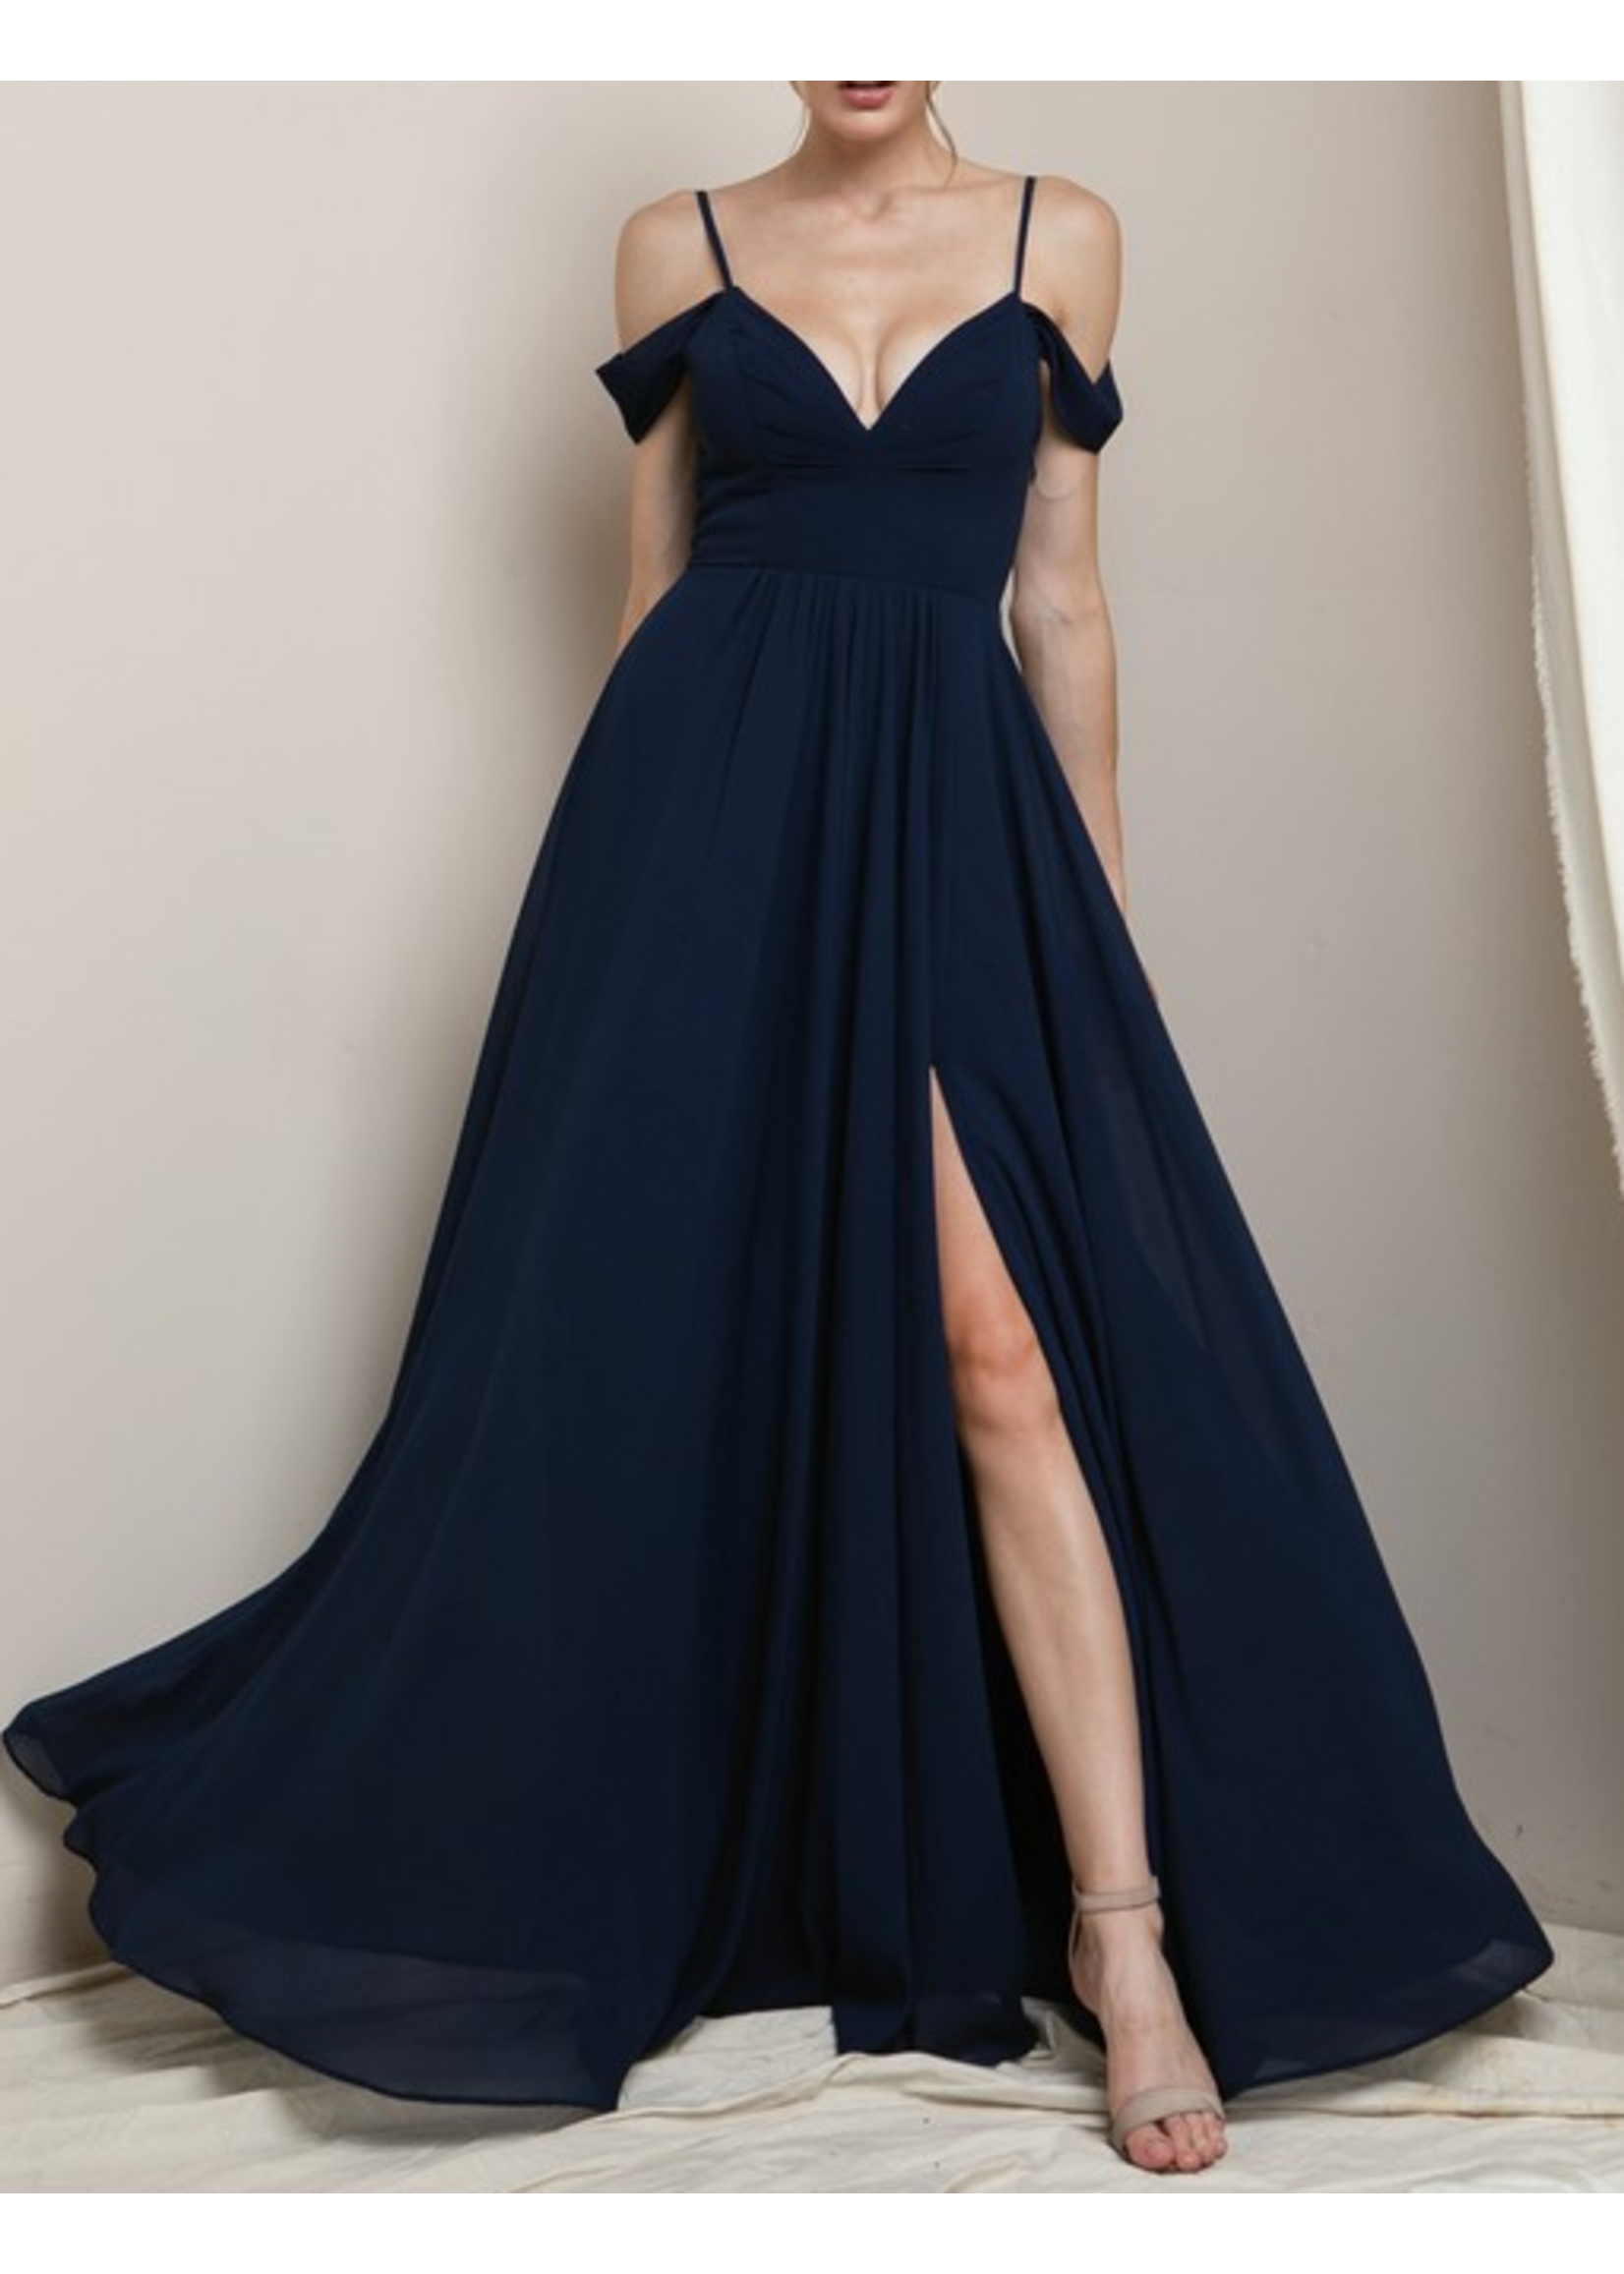 SBM192300 -  OFF SHOULDER DRAPED SLEEVED GOWN WITH LACE BACK DETAIL